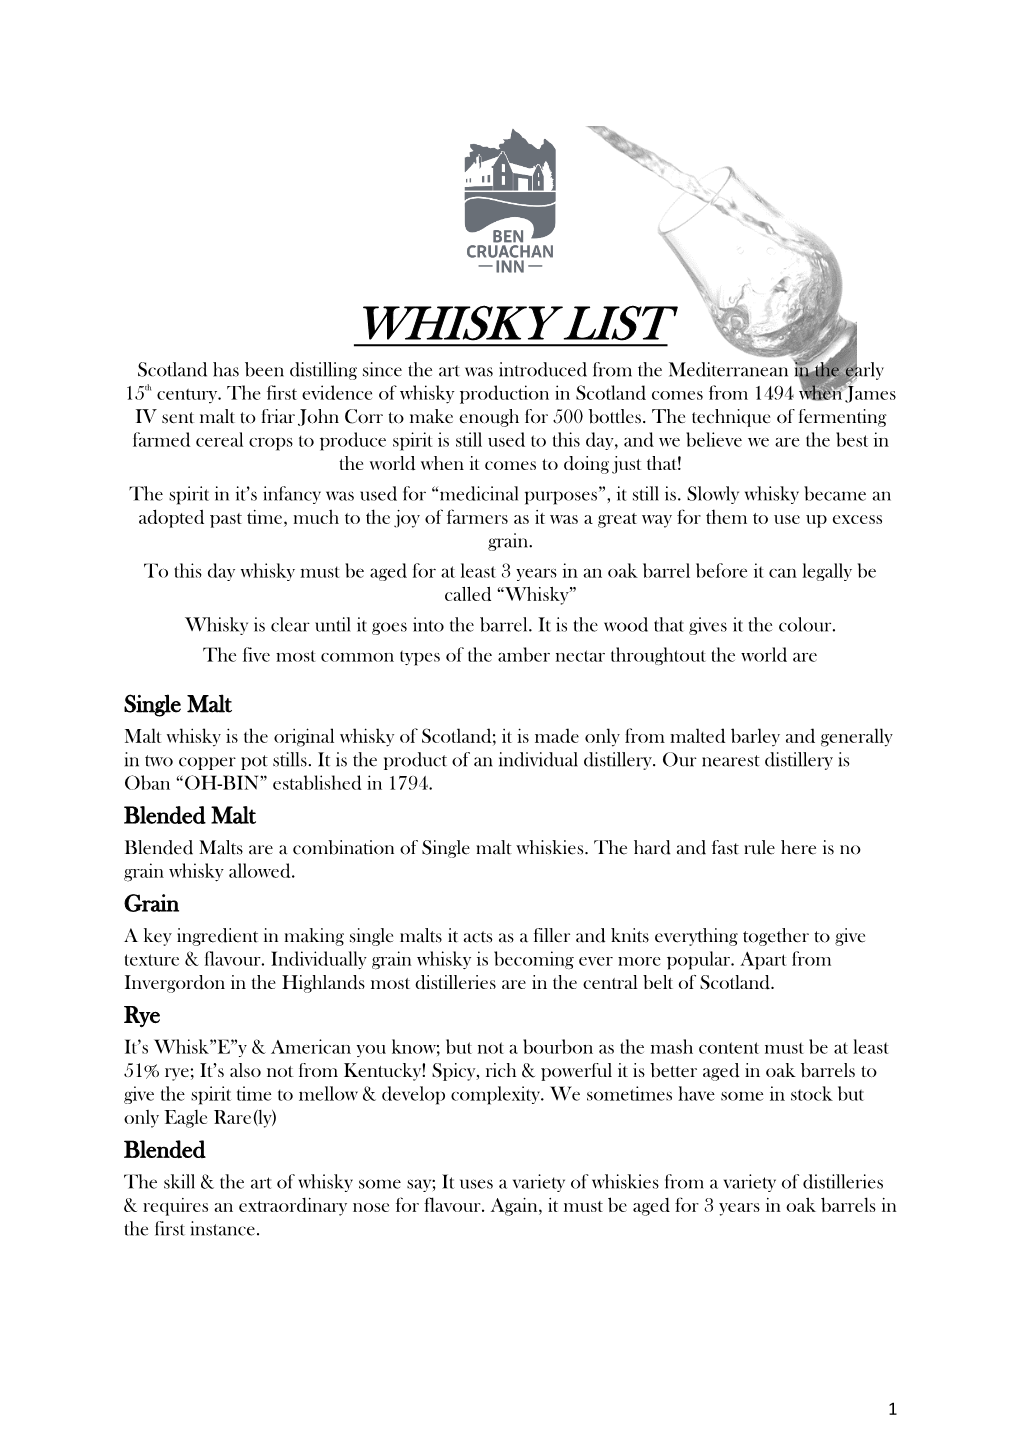 WHISKY LIST Scotland Has Been Distilling Since the Art Was Introduced from the Mediterranean in the Early 15Th Century